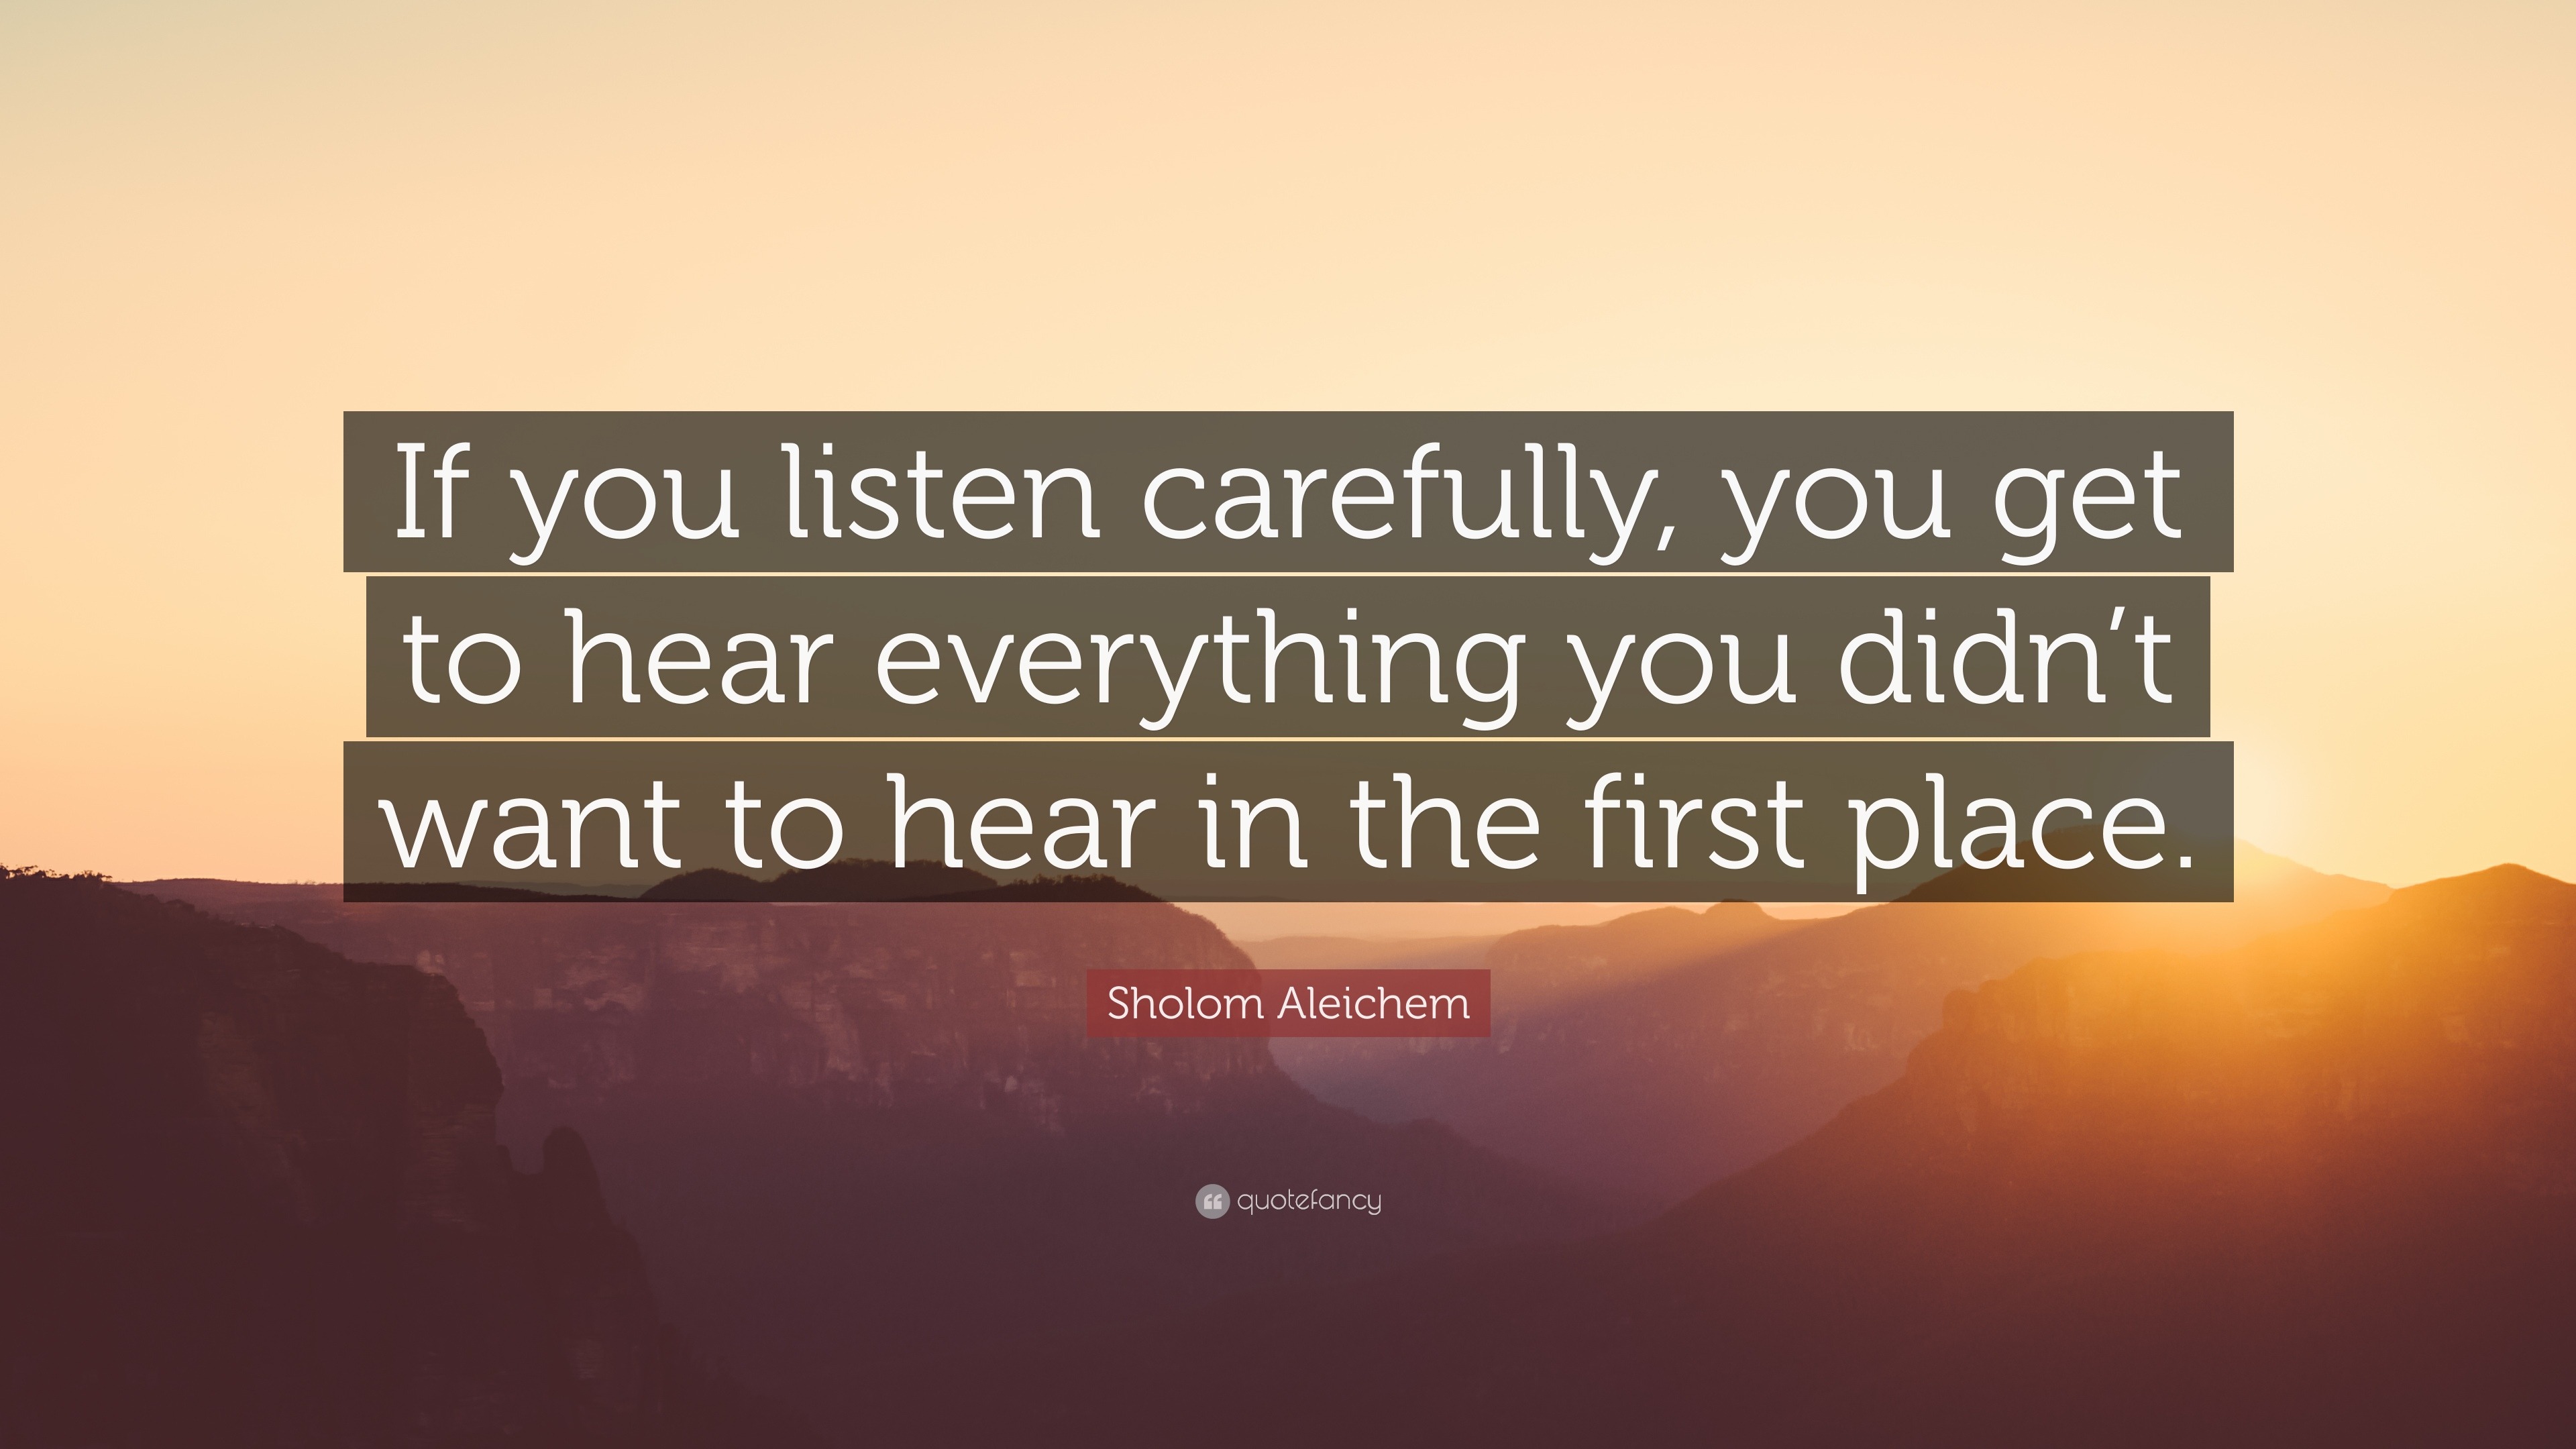 Sholem Aleichem Quote: “If you listen carefully, you get to hear ...